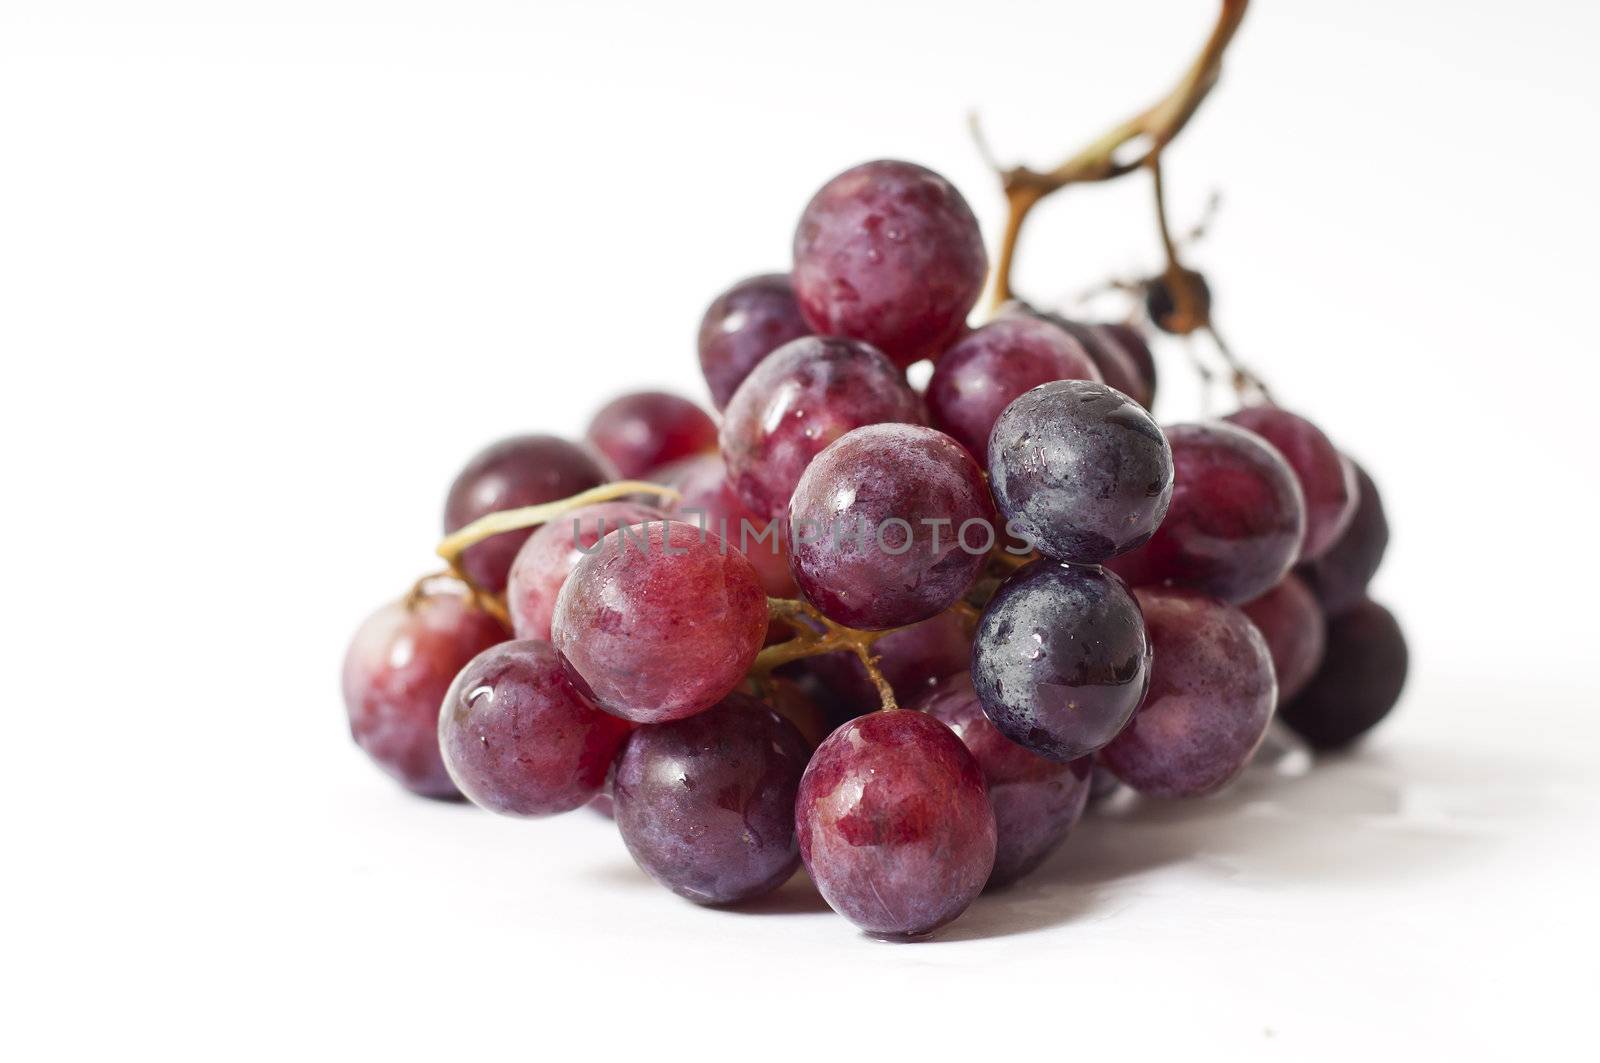 Black grapes on white background by peus